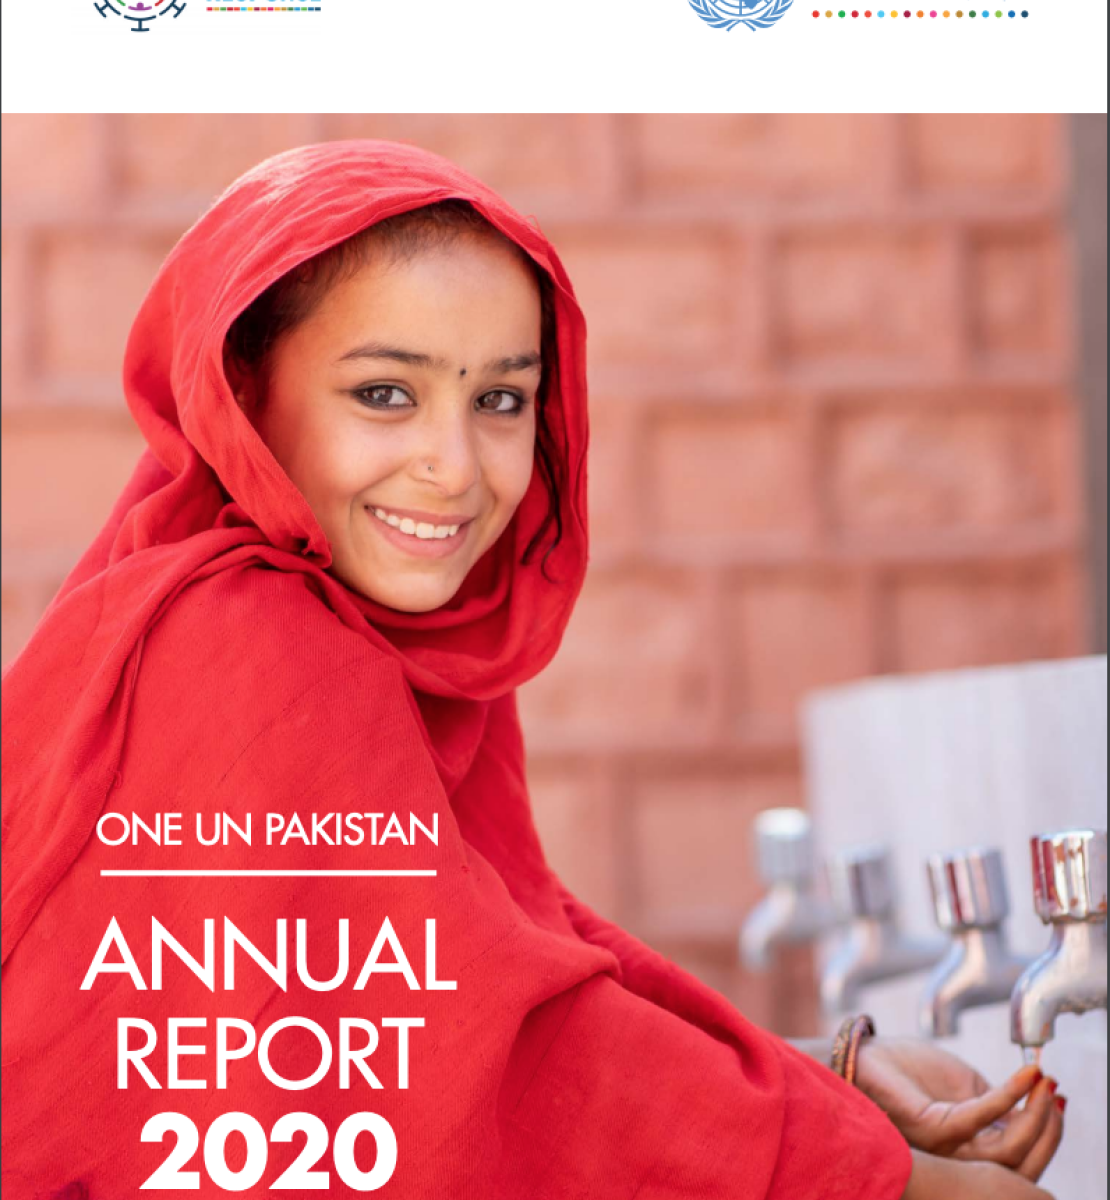 The cover shows the UNCT and COVID response logos against a white background above a photo of a young girl smiling sweetly at the camera as she washes her hands. The title of the report is in white over the image of the girl.